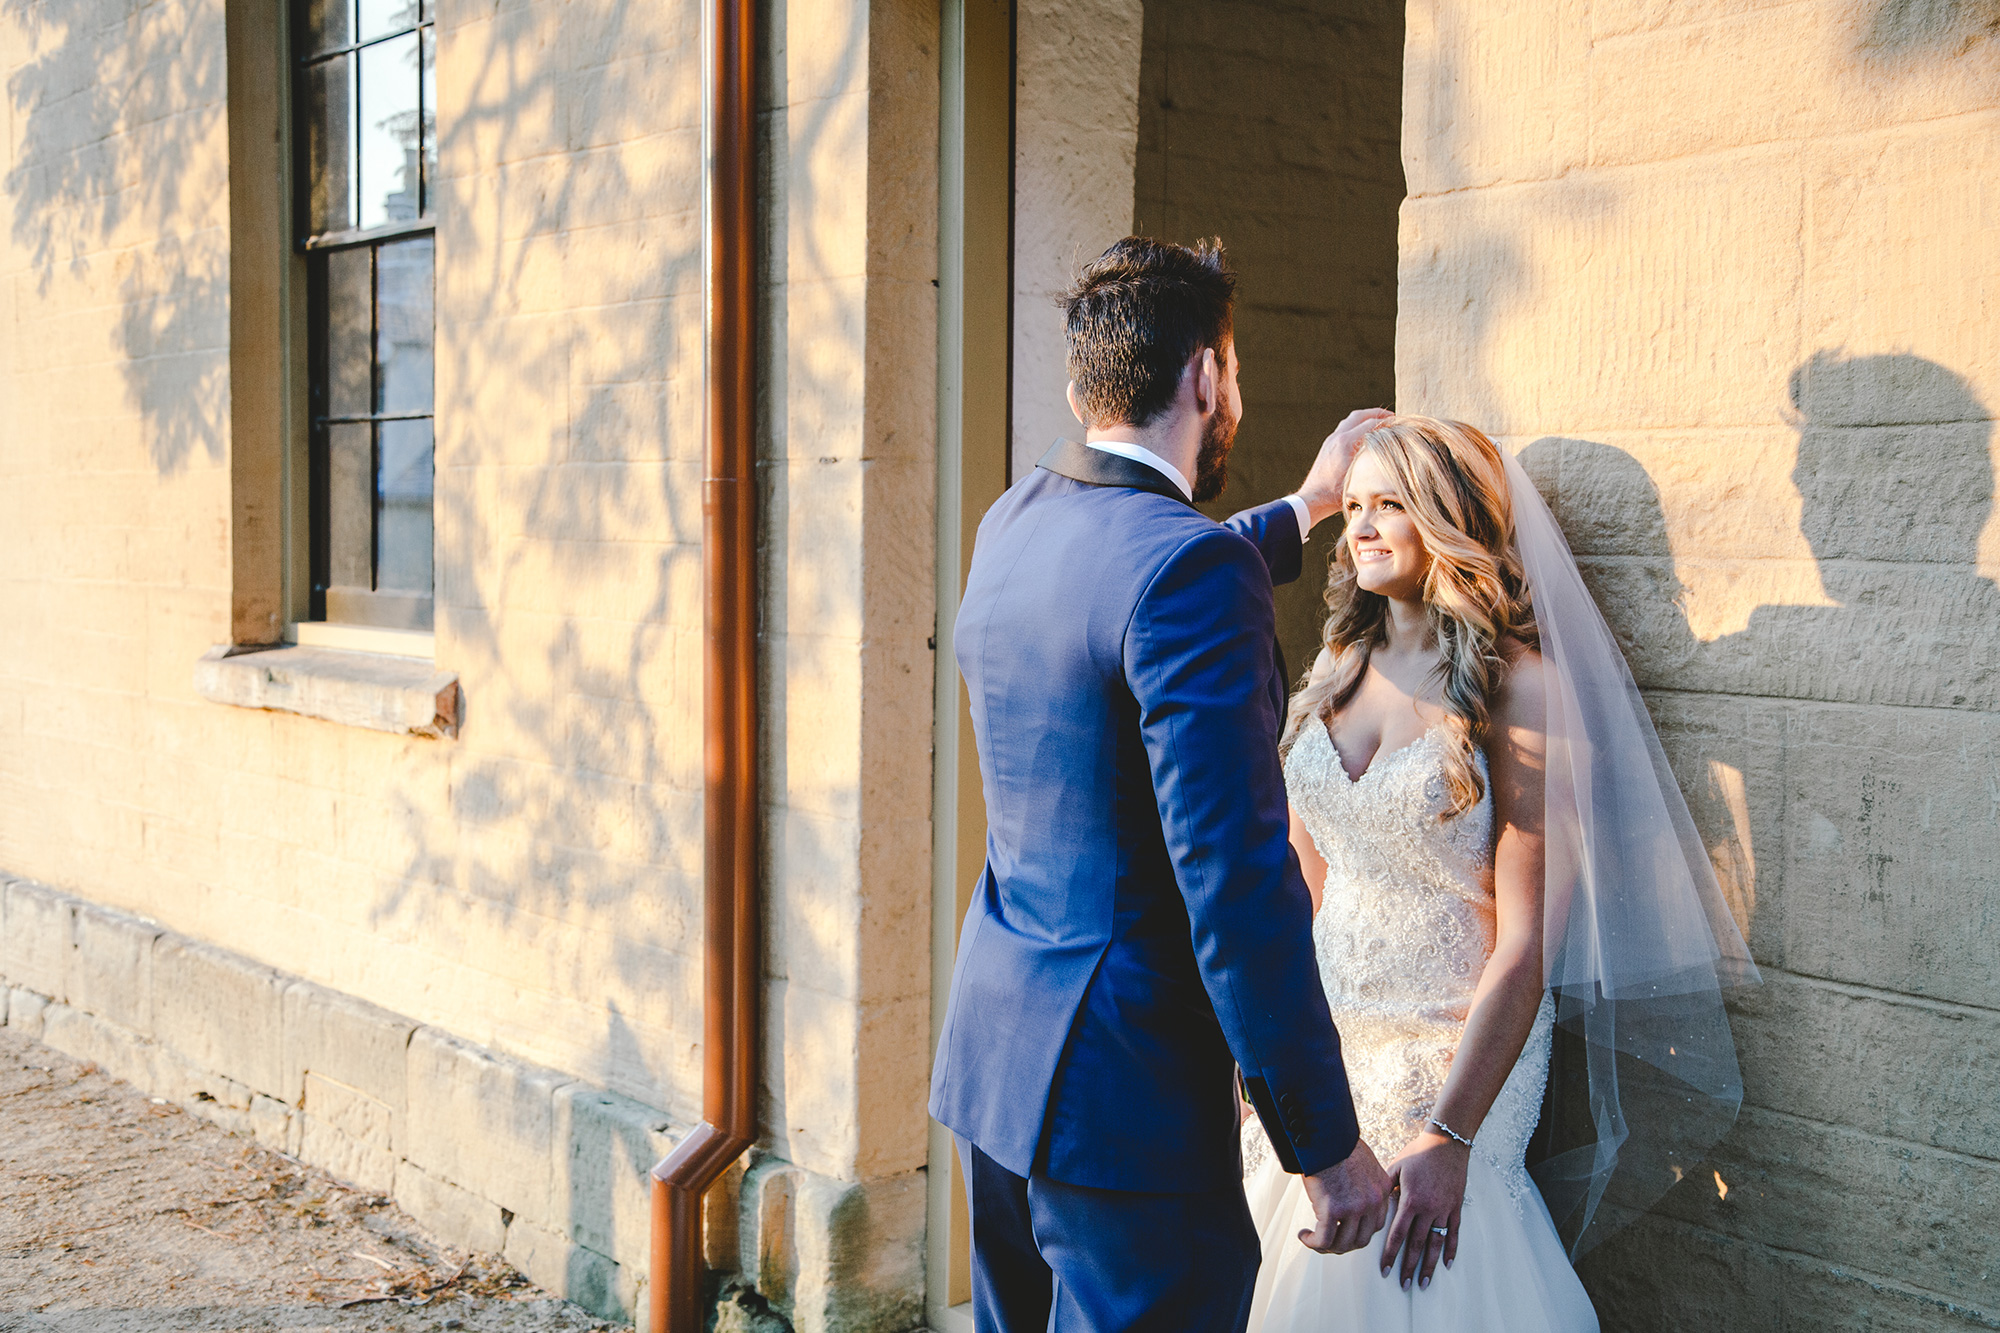 Camille_James_Rustic-Glam-Wedding_Pure-Image-Photography_039